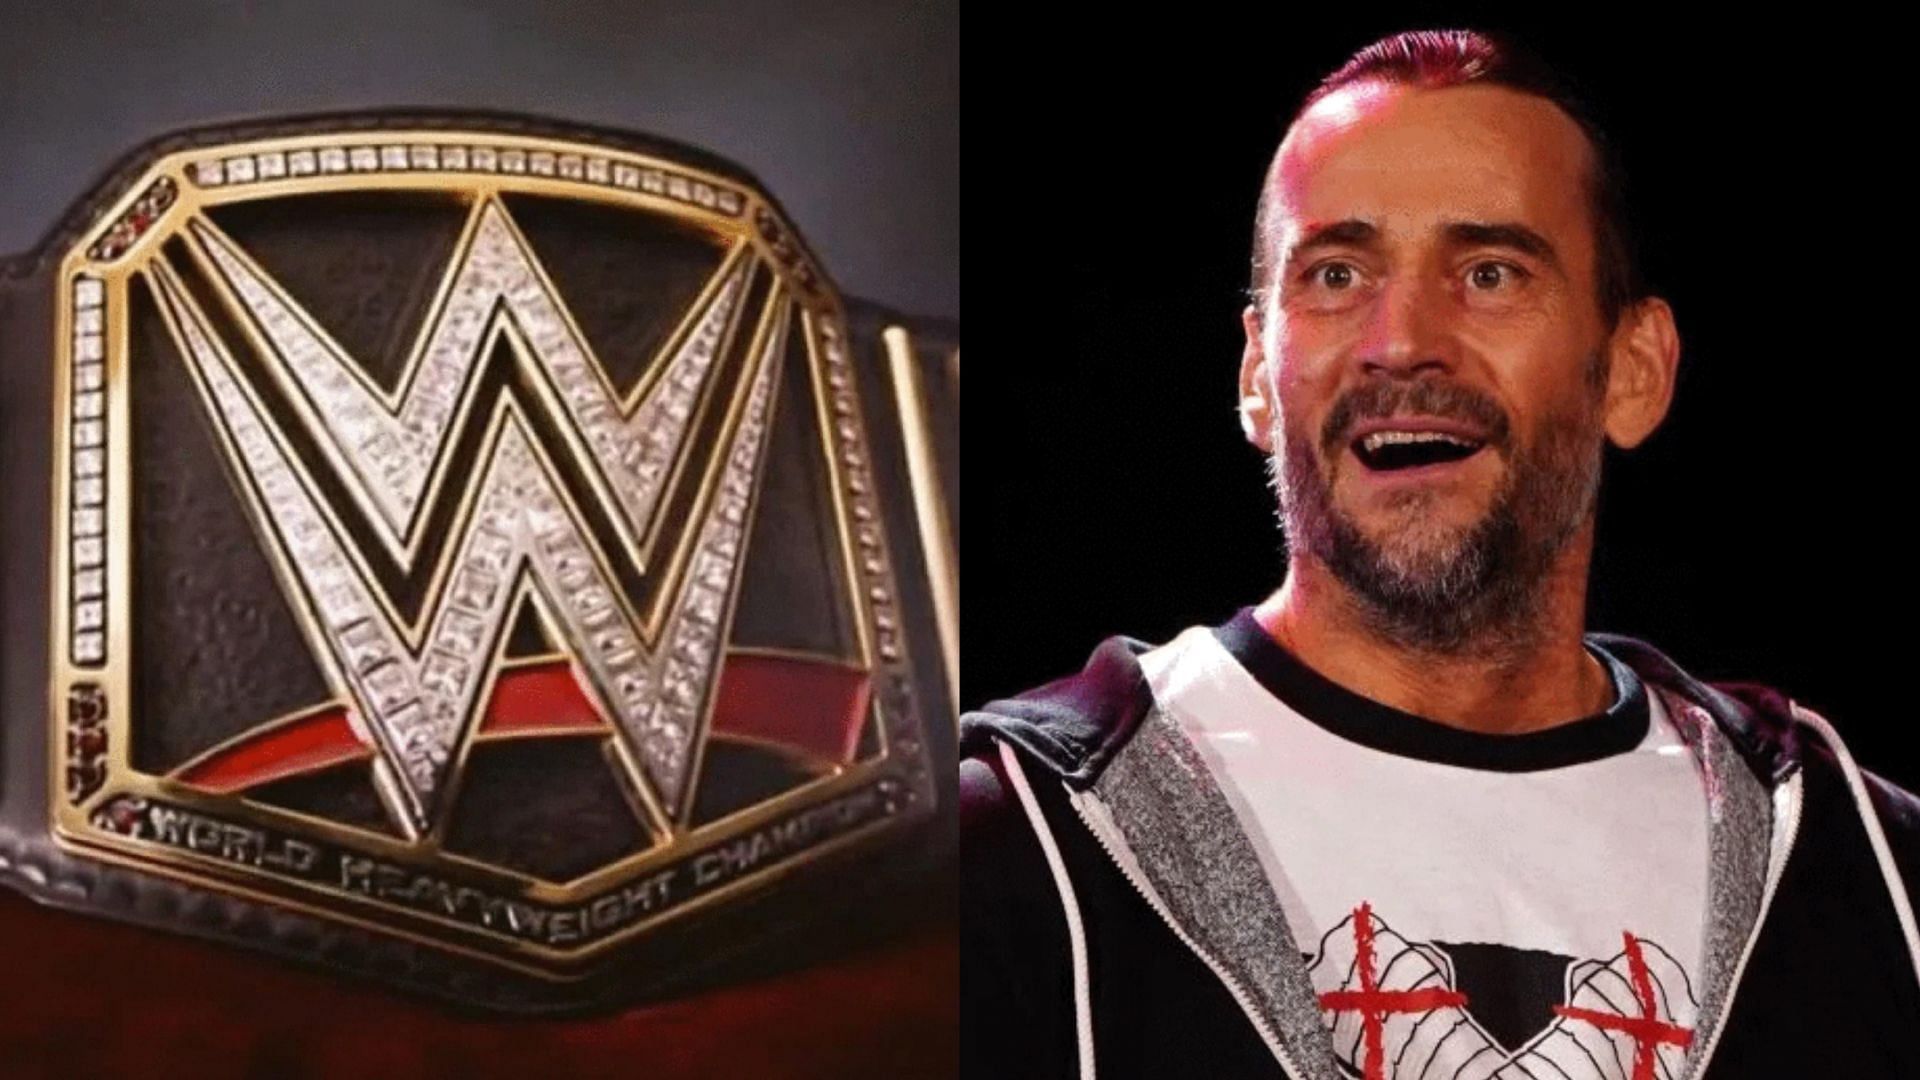 CM Punk is a former WWE and AEW World Champion.